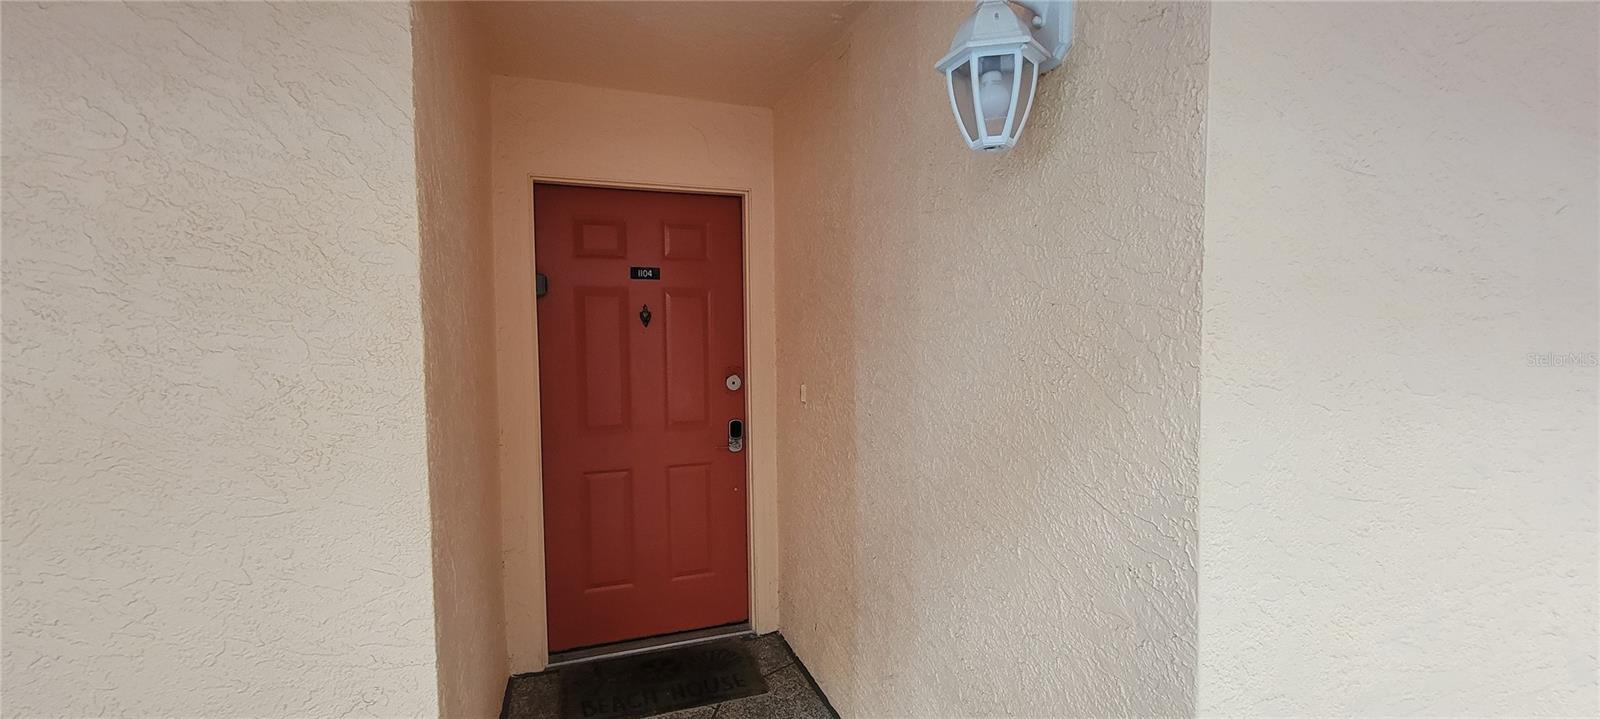 1104 entrance has door keypad and additional lockbox at door for convenience of owner or renters